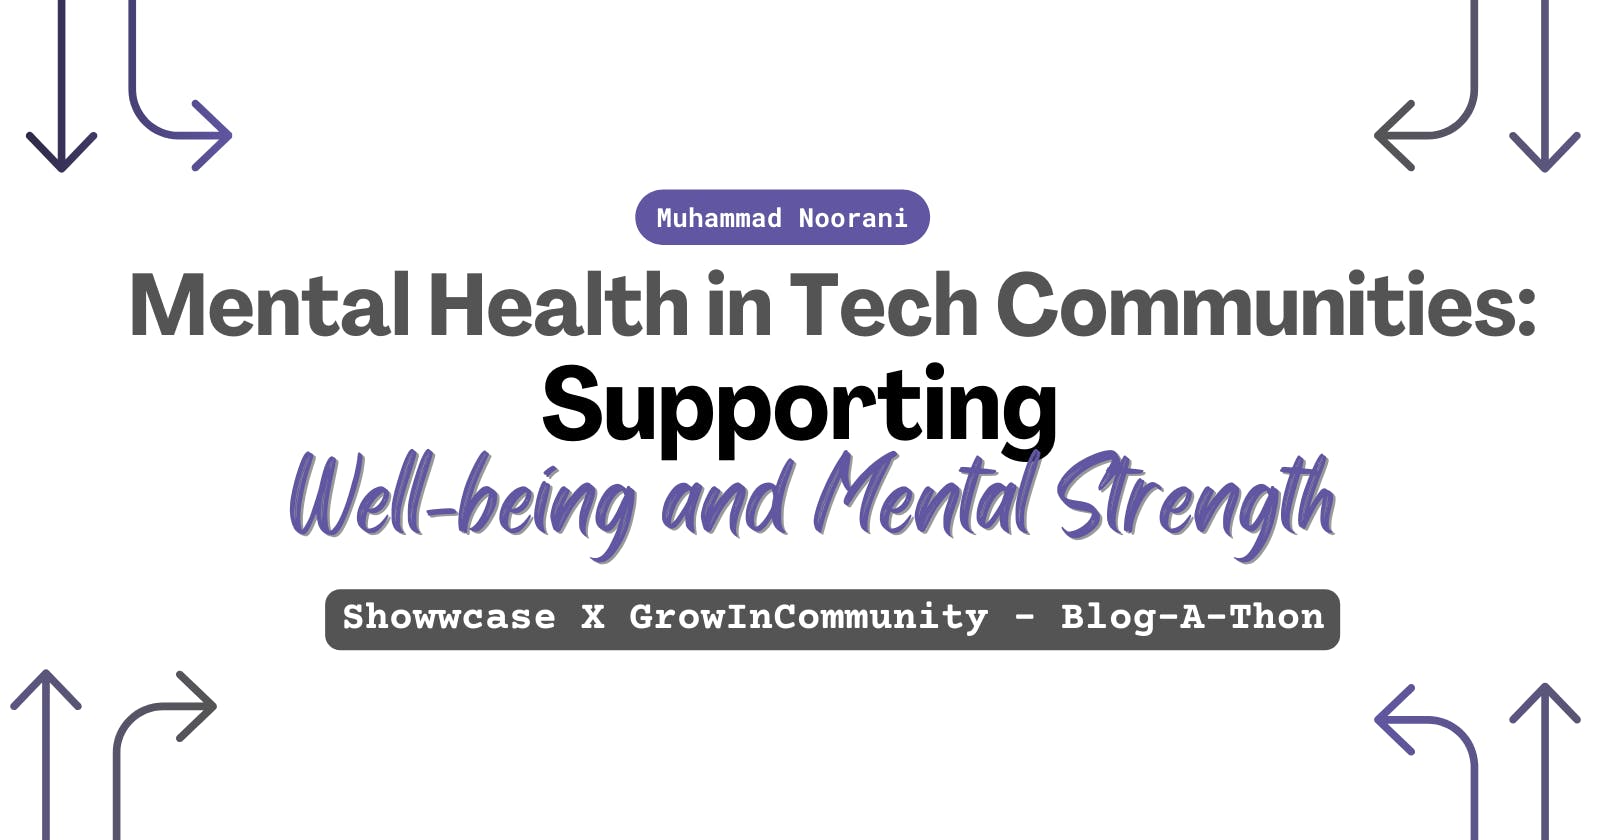 Mental Health in Tech Communities: Supporting Well-being and Mental Strength